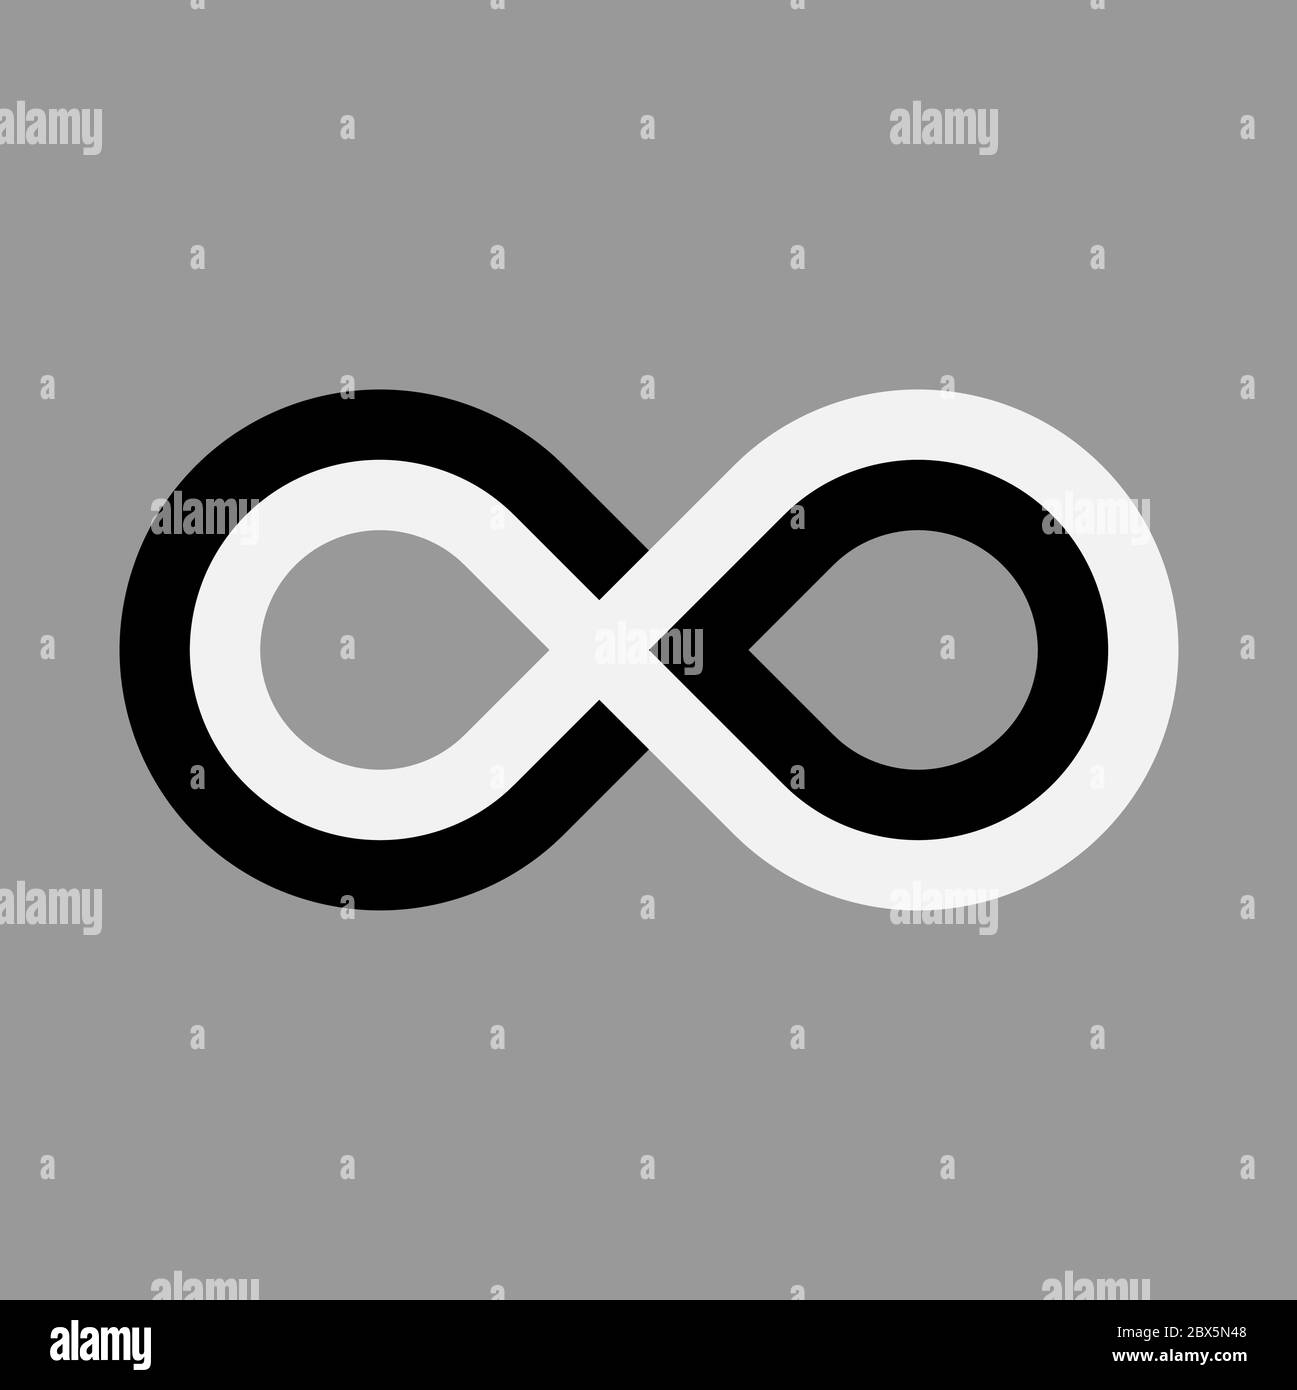 Infinity symbol icon. Representing the concept of infinite, limitless and endless things. Simple tripple line vector design element on white background. Stock Vector